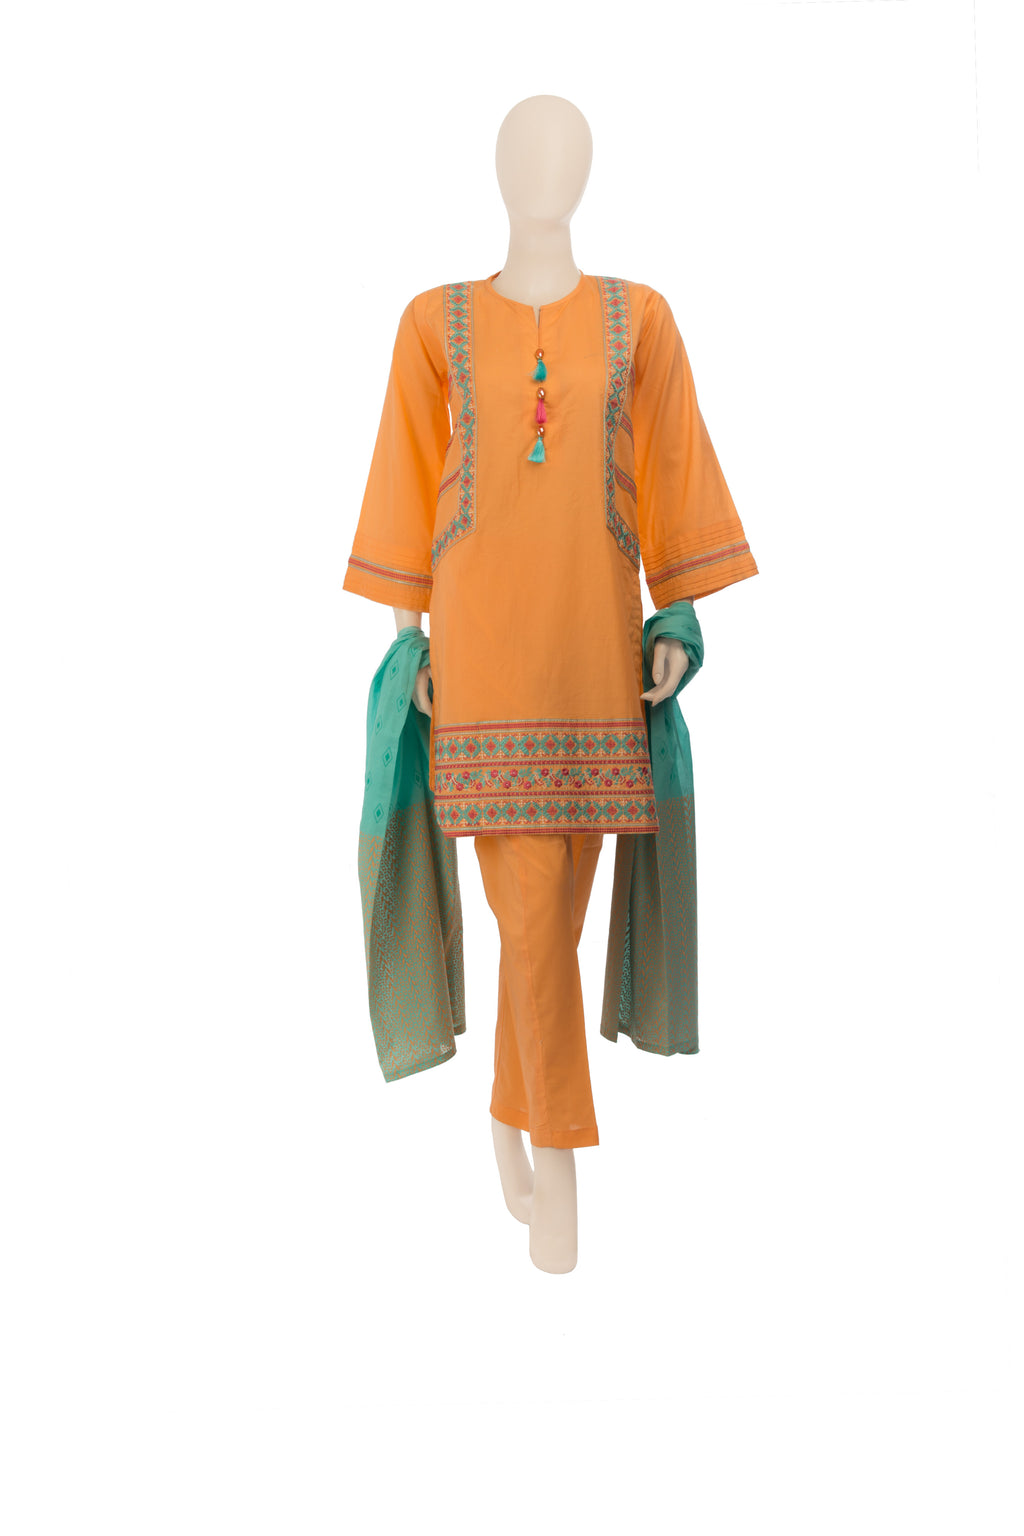 LAD-00575 Embroidered 3PC Suit - Komal's